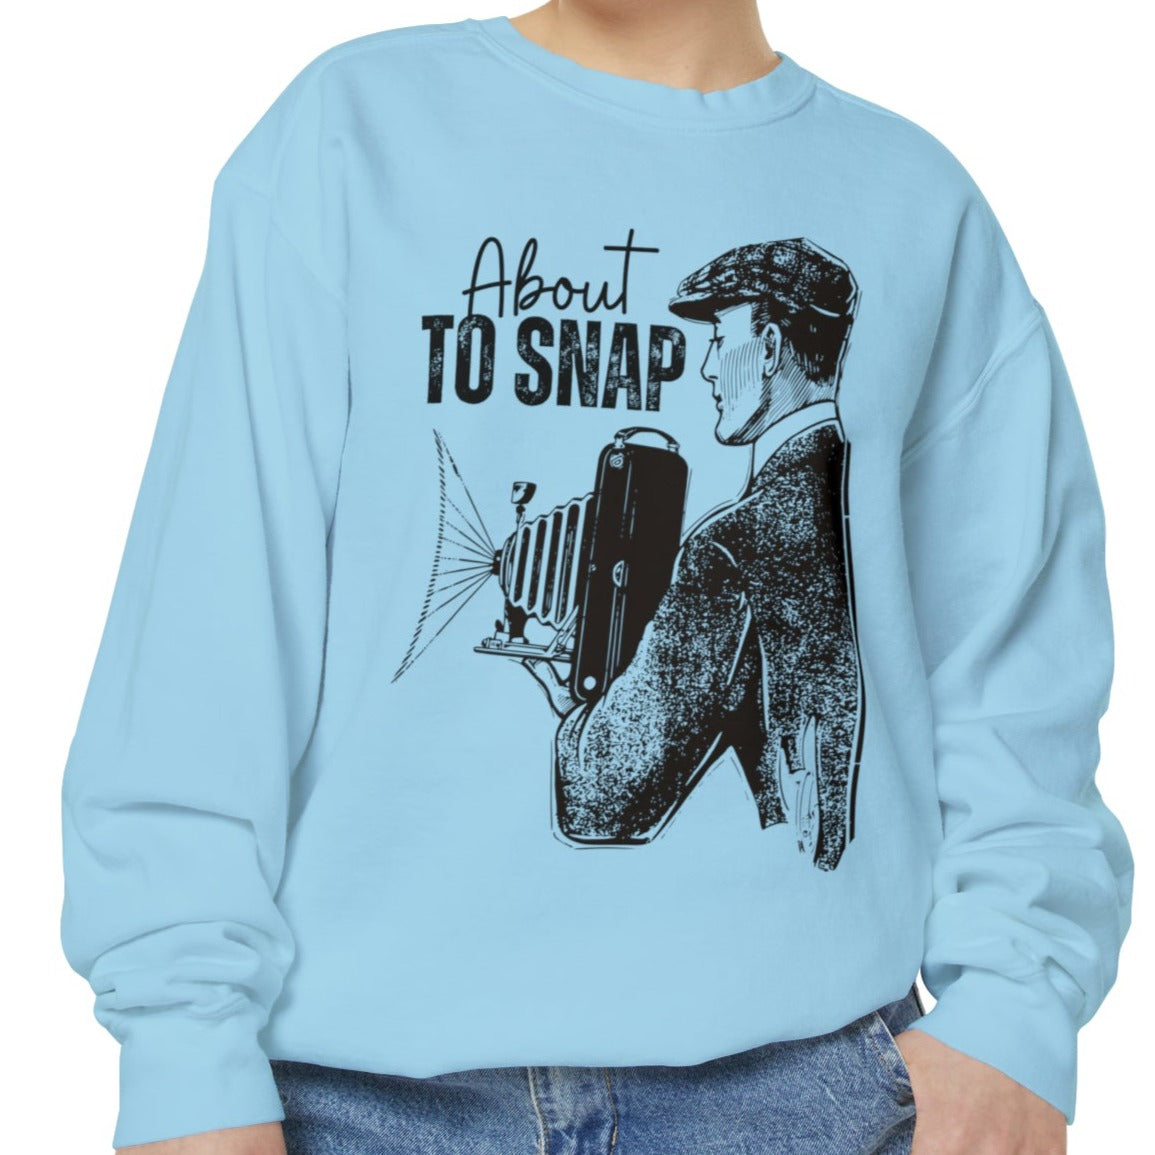 About to Snap Comfort Colors Sweatshirt - Eddy and RitaAbout to Snap Comfort Colors Sweatshirt - Eddy and Rita